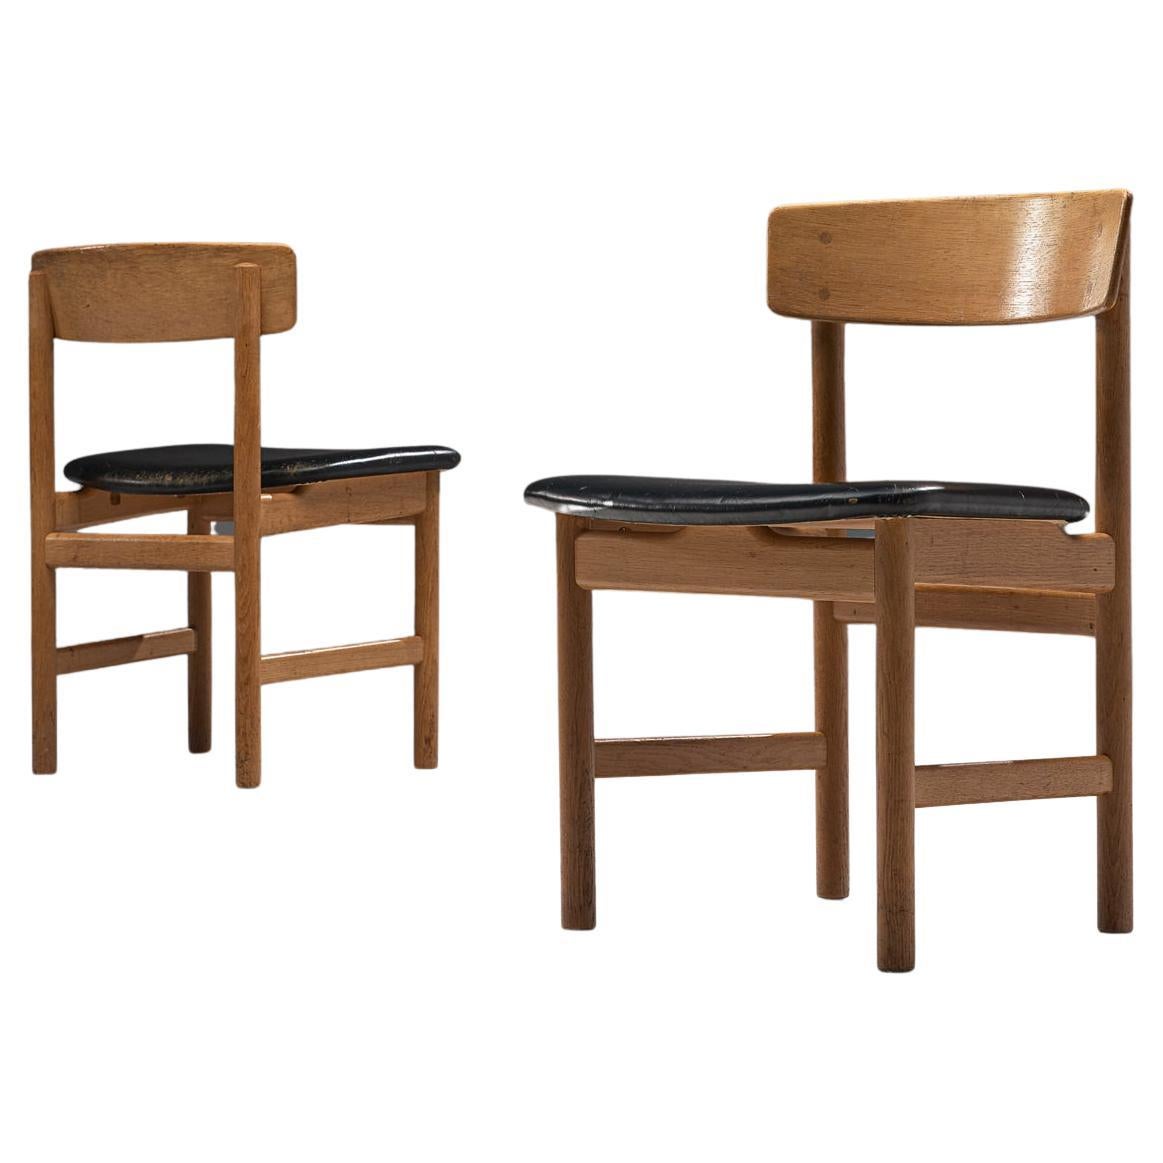 Børge Mogensen Early Pair of Dining Chairs in Oak and Leather 